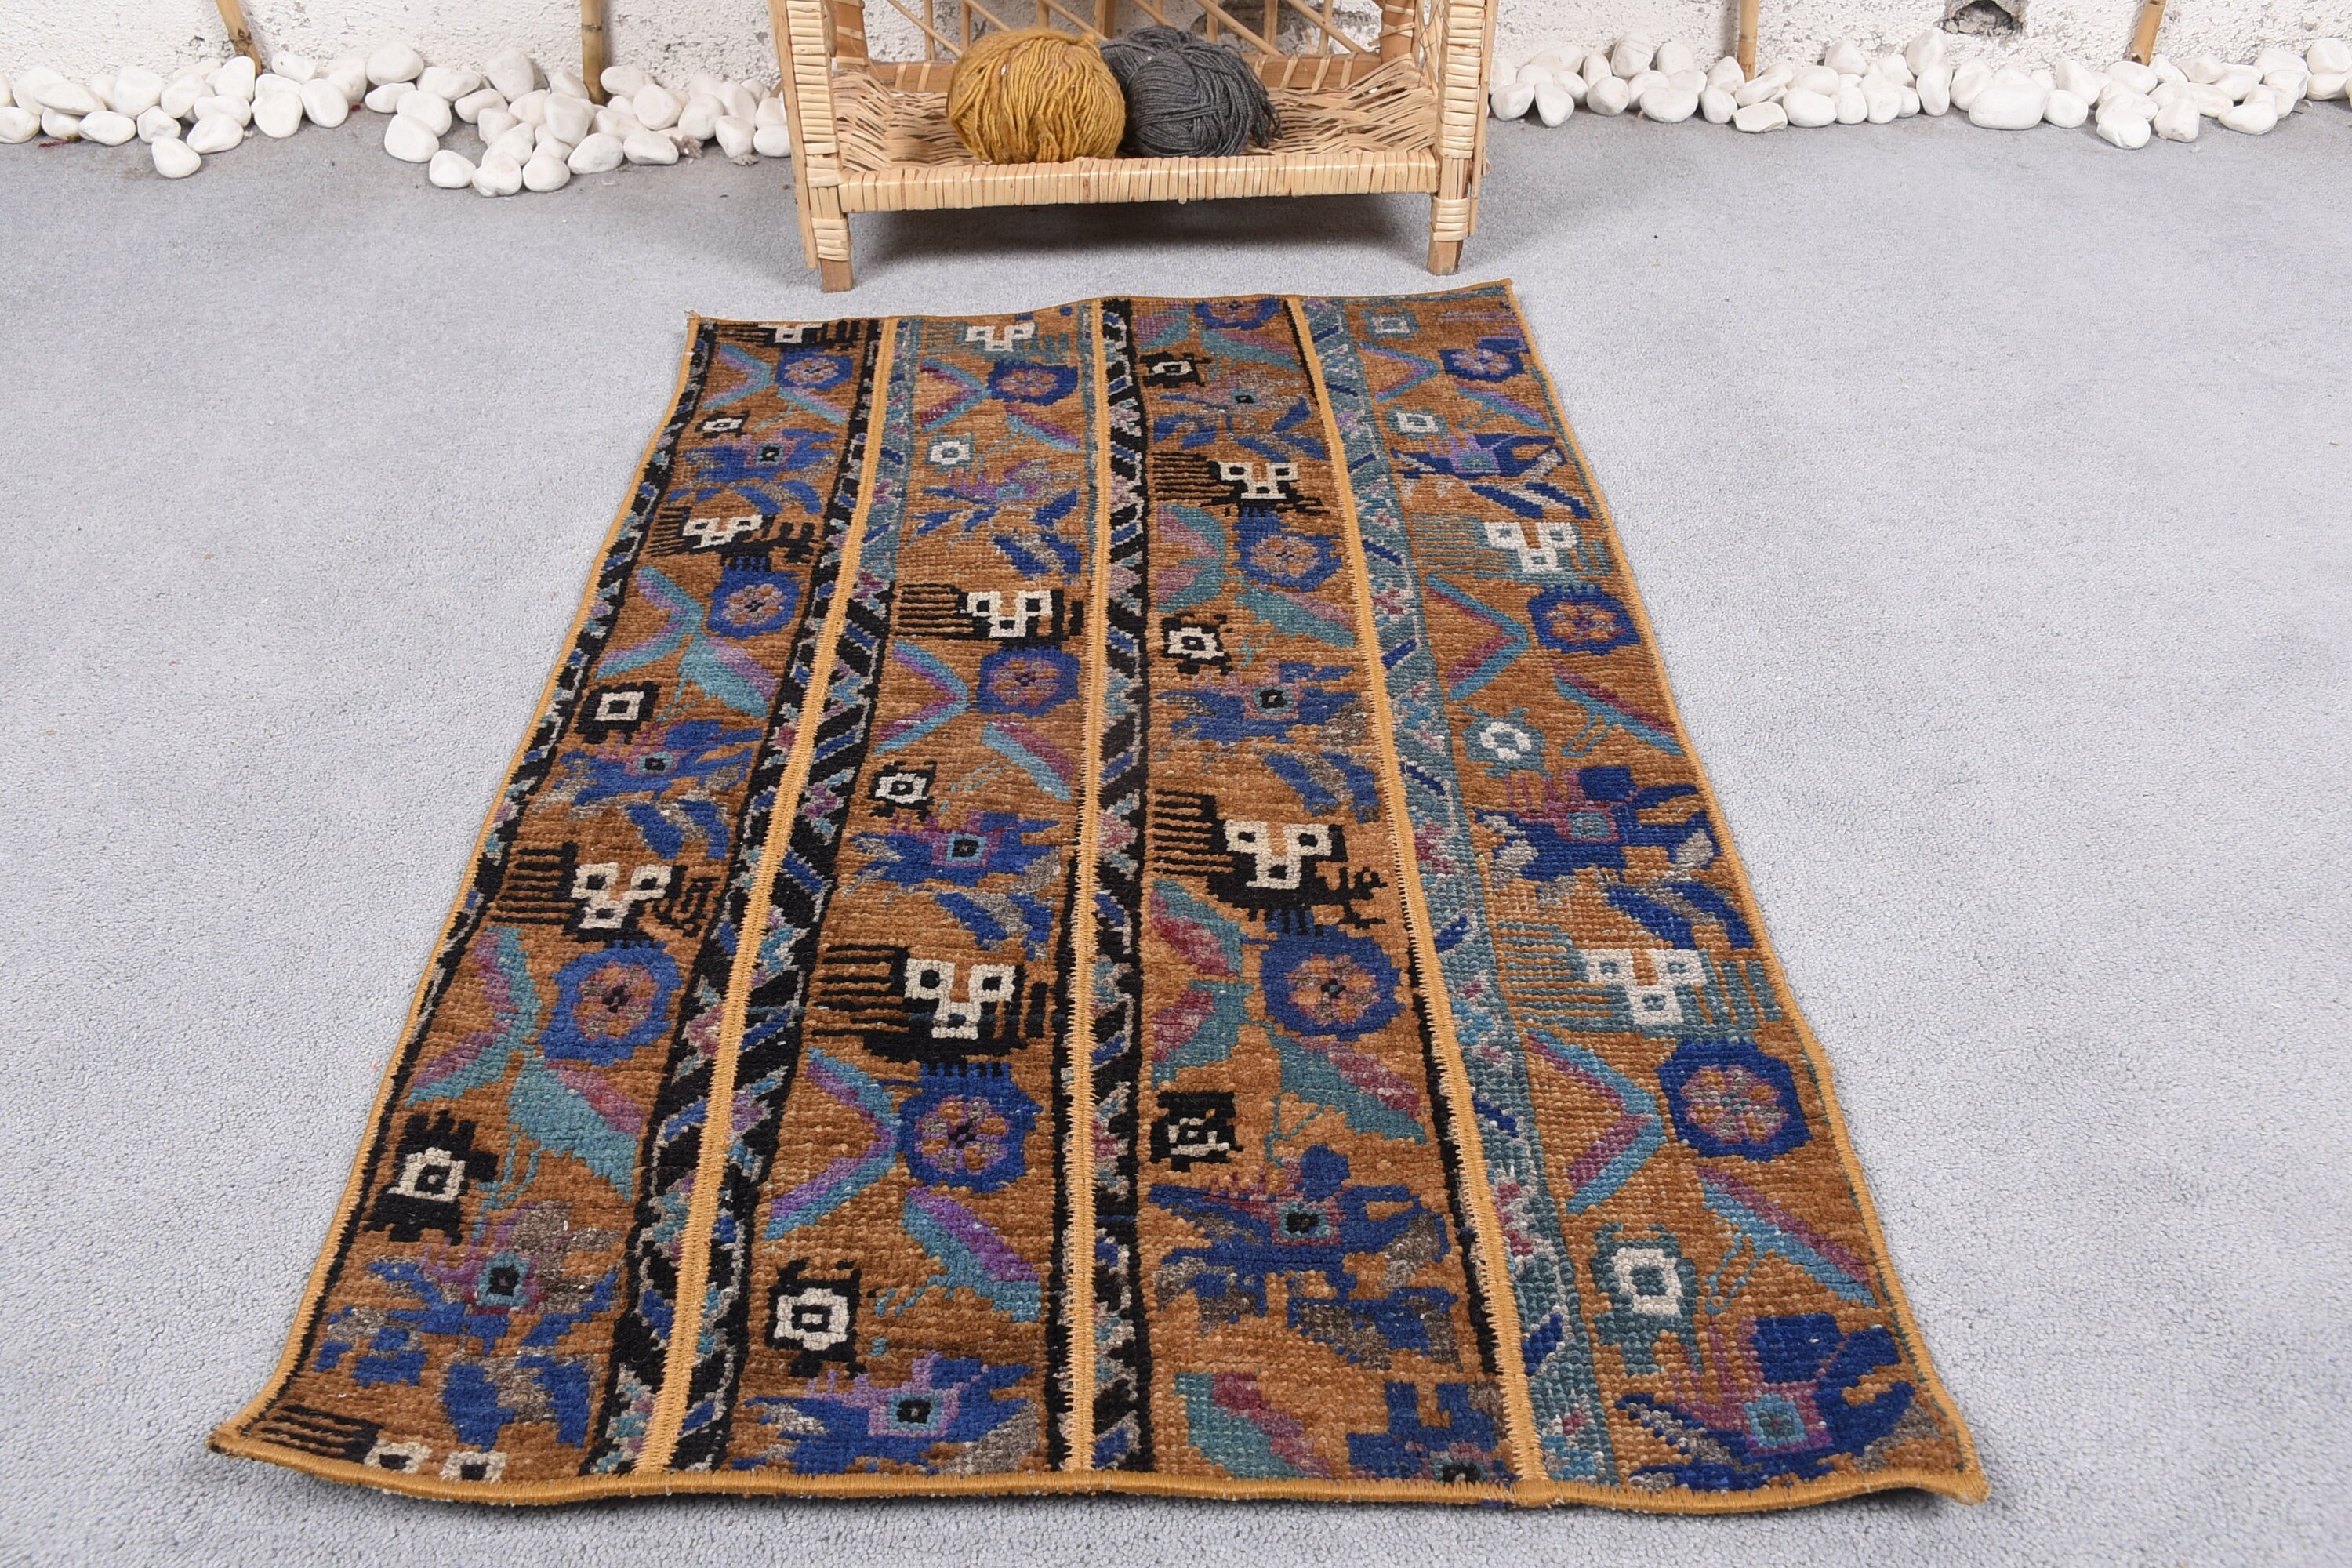 Yellow Anatolian Rugs, Turkish Rugs, Office Rugs, Entry Rugs, Vintage Rug, 1.8x3.1 ft Small Rug, Anatolian Rug, Kitchen Rug, Oriental Rugs